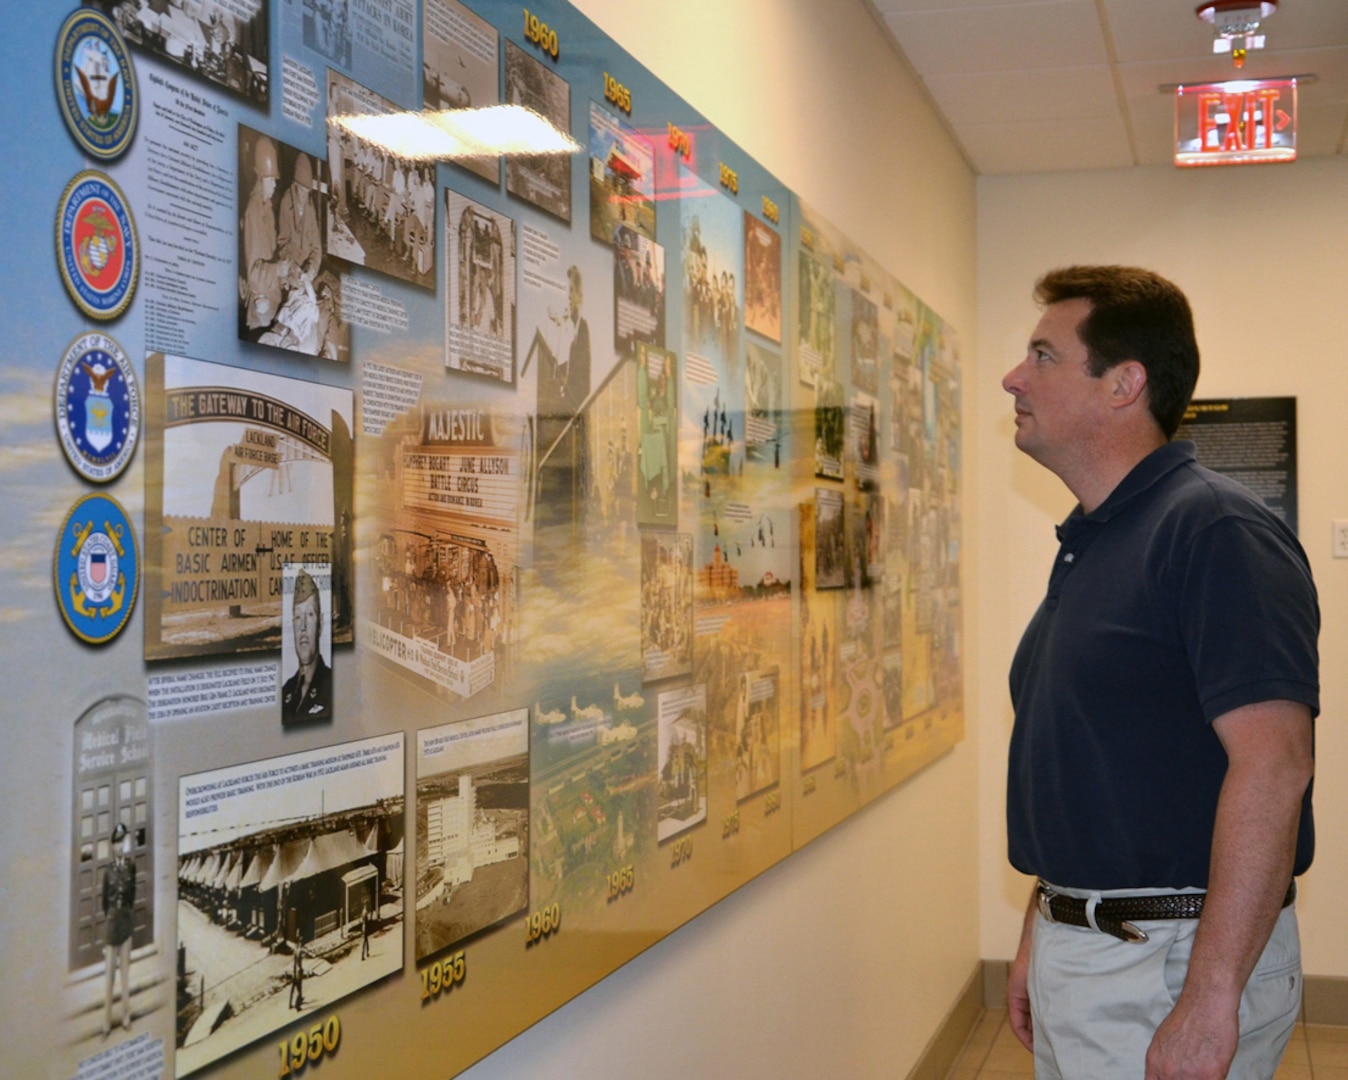 Peter Law, 502nd Air Base Wing historian, admires the new mural depicting San Antonio’s rich military history at the 502nd ABW headquarters on Joint Base San Antonio-Fort Sam Houston. (U.S. Army photo by Lori Newman)
